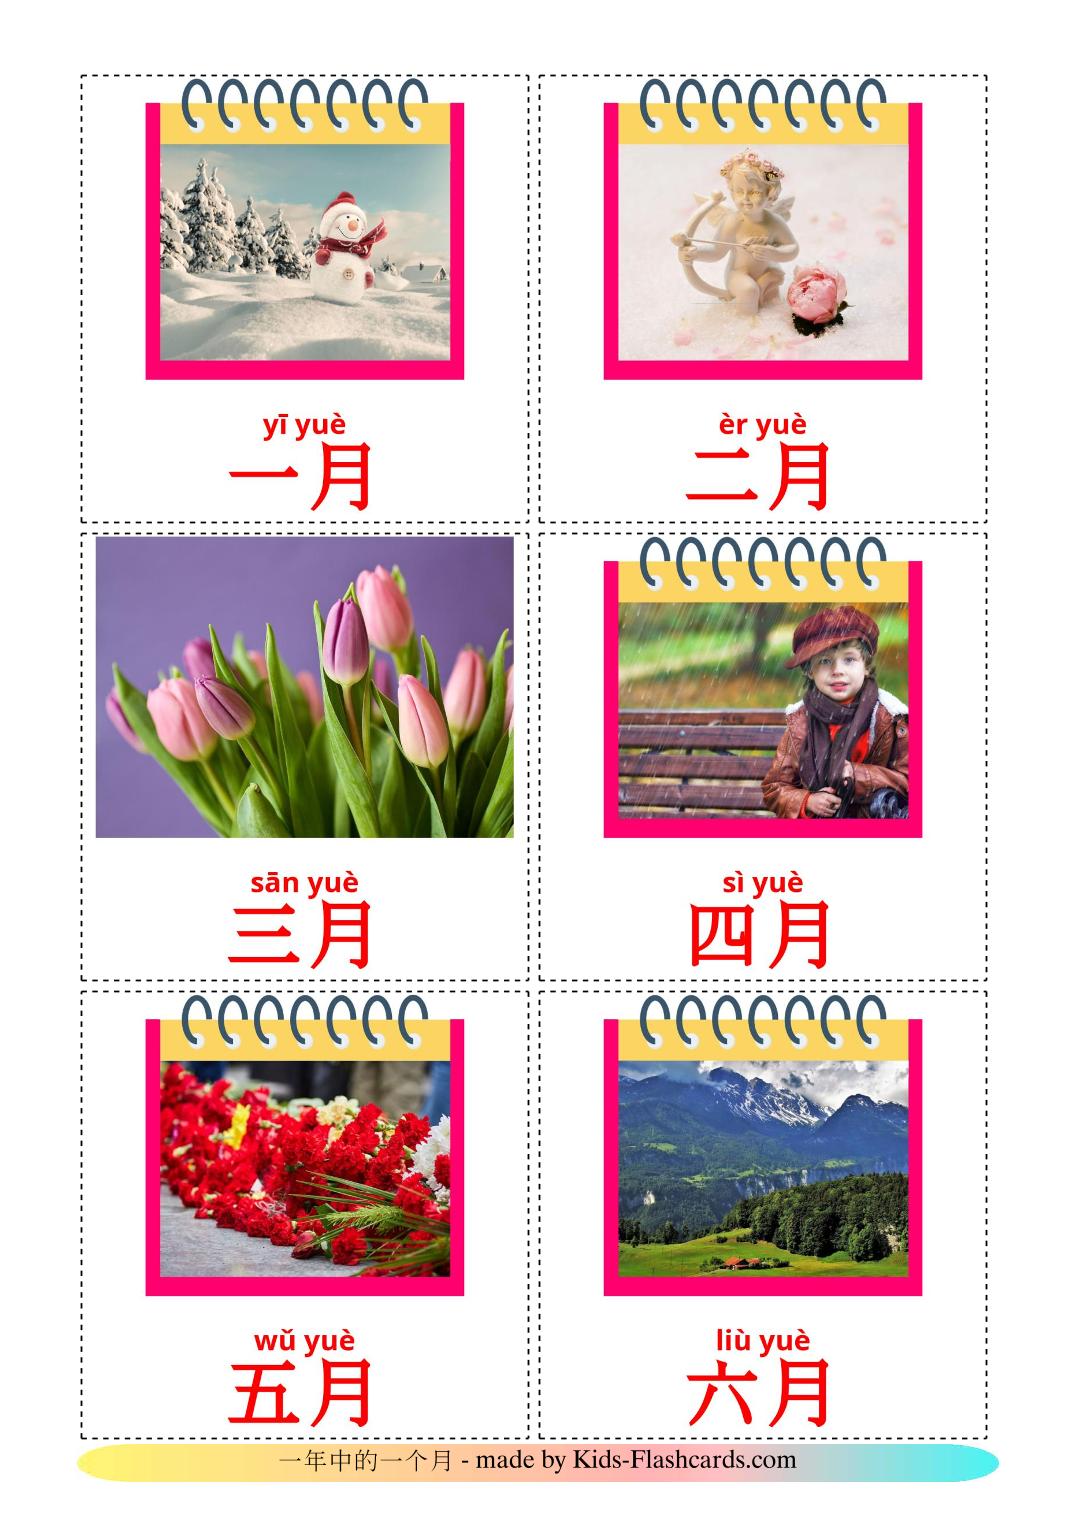 Months of the Year - 12 Free Printable chinese(Simplified) Flashcards 